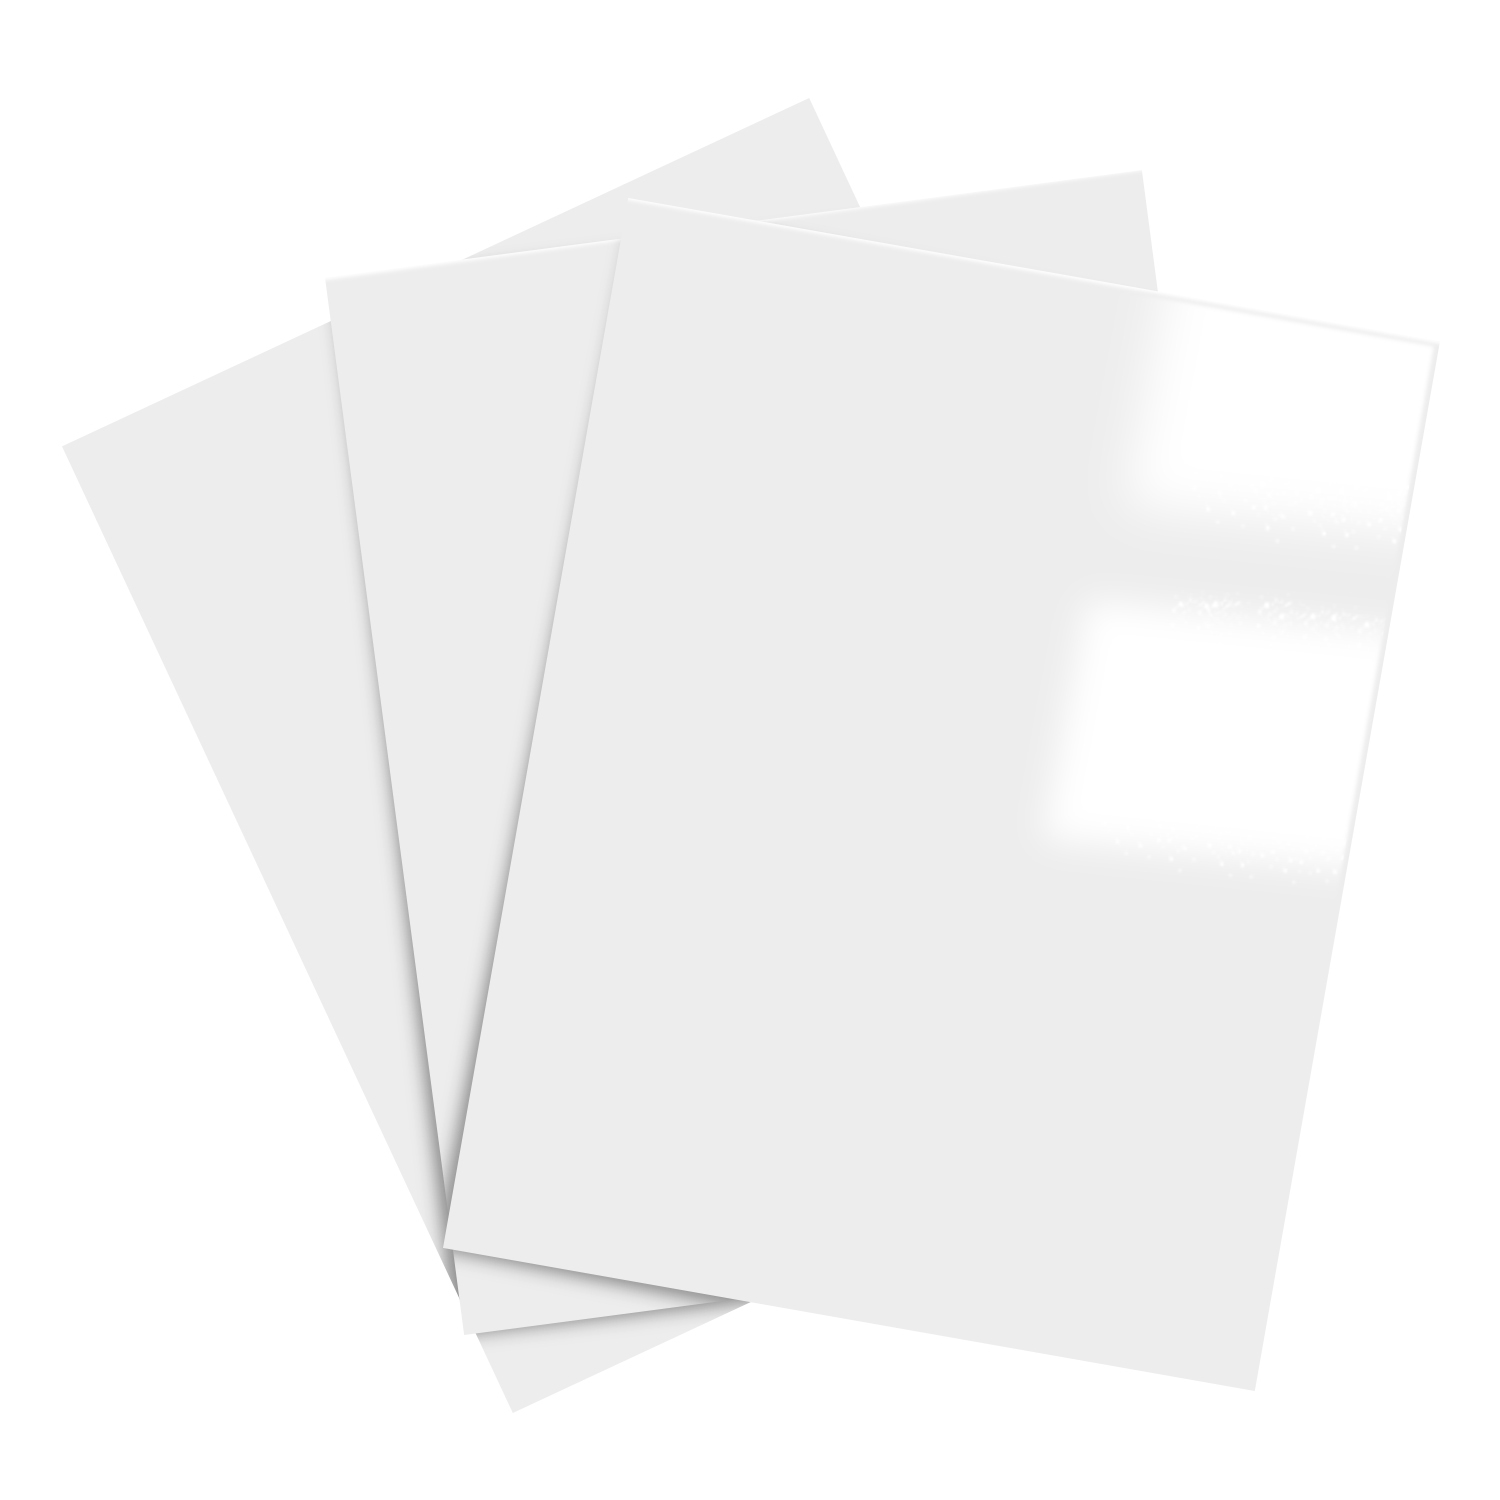 Double-Sided Gloss Card Stock Paper C2S Glossy Cardstock for Photos,  Flyers, Posters | 80lb Cover (216gsm) | 8.5 x 11 | 100 Sheets per Pack